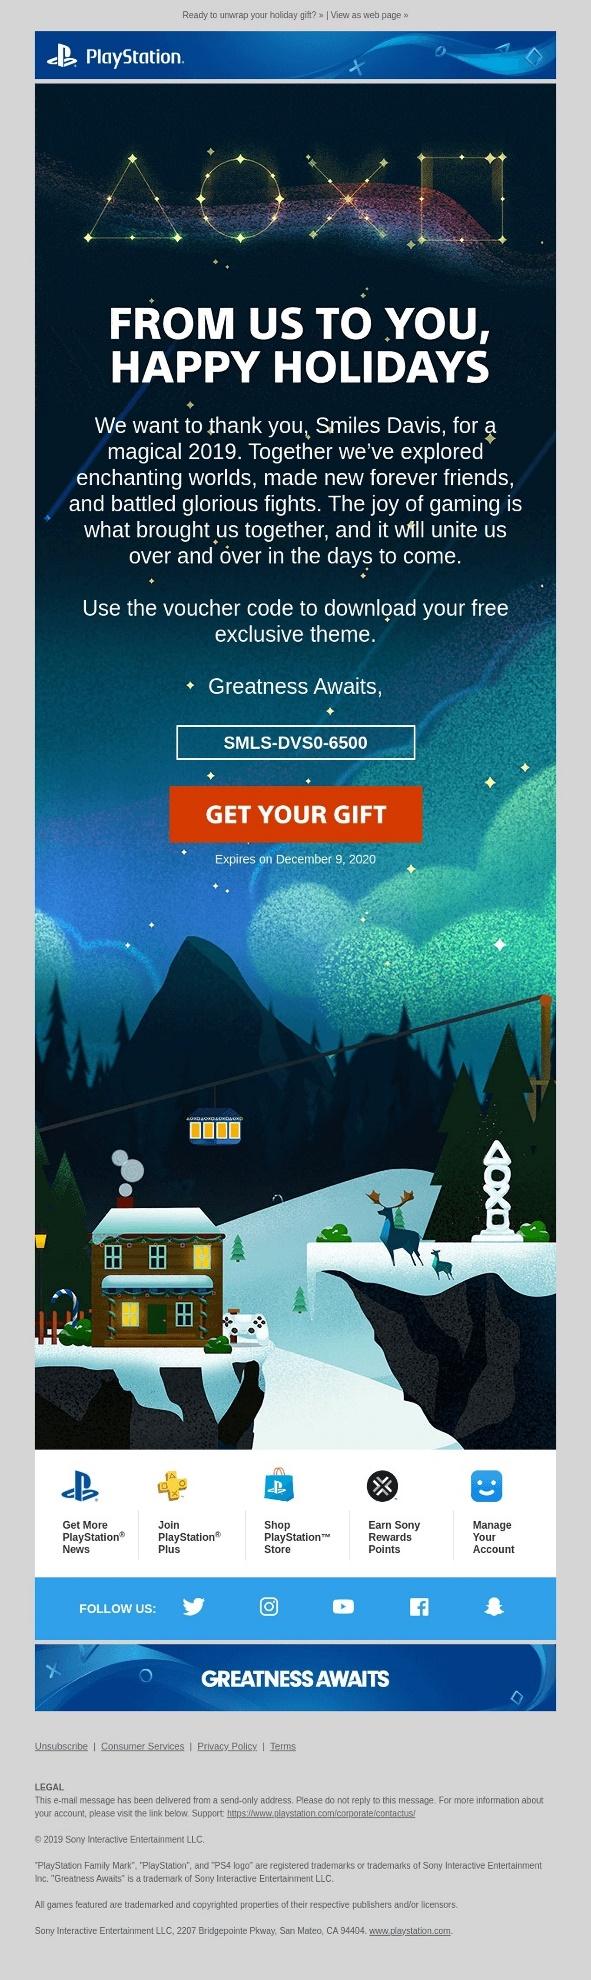 An email example with a holiday greeting and included holiday gift offer